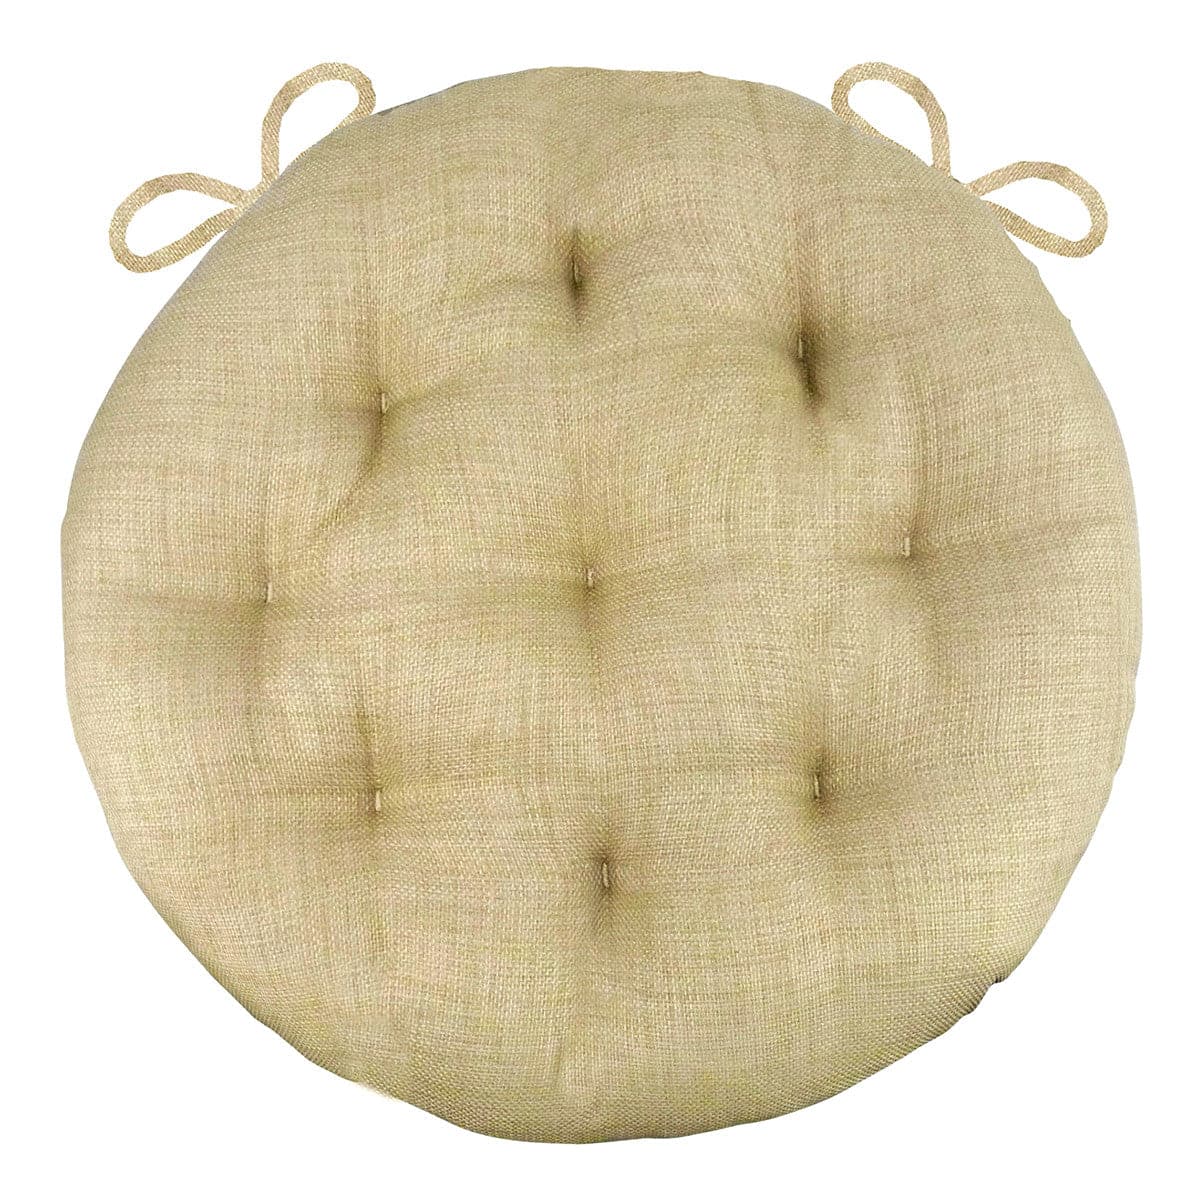 Rave Sand Bistro Chair Pad - 16" Round Cushion with Ties -Barnett Home Decor - Indoor/Outdoor